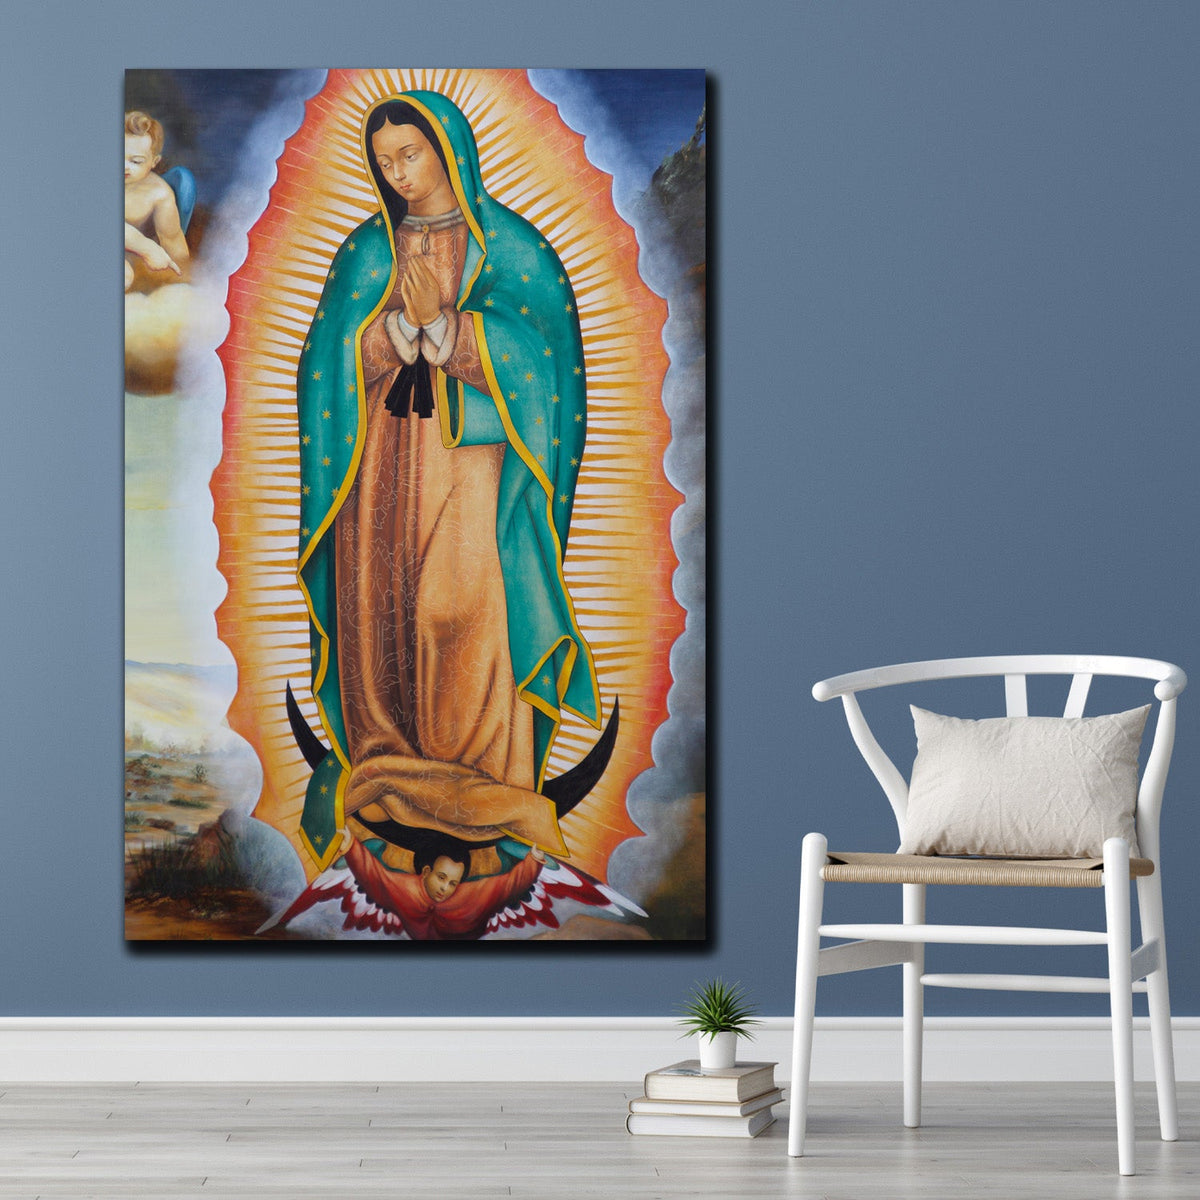 https://cdn.shopify.com/s/files/1/0387/9986/8044/products/VirginMaryofGuadalupeCanvasArtprintStretched-4.jpg